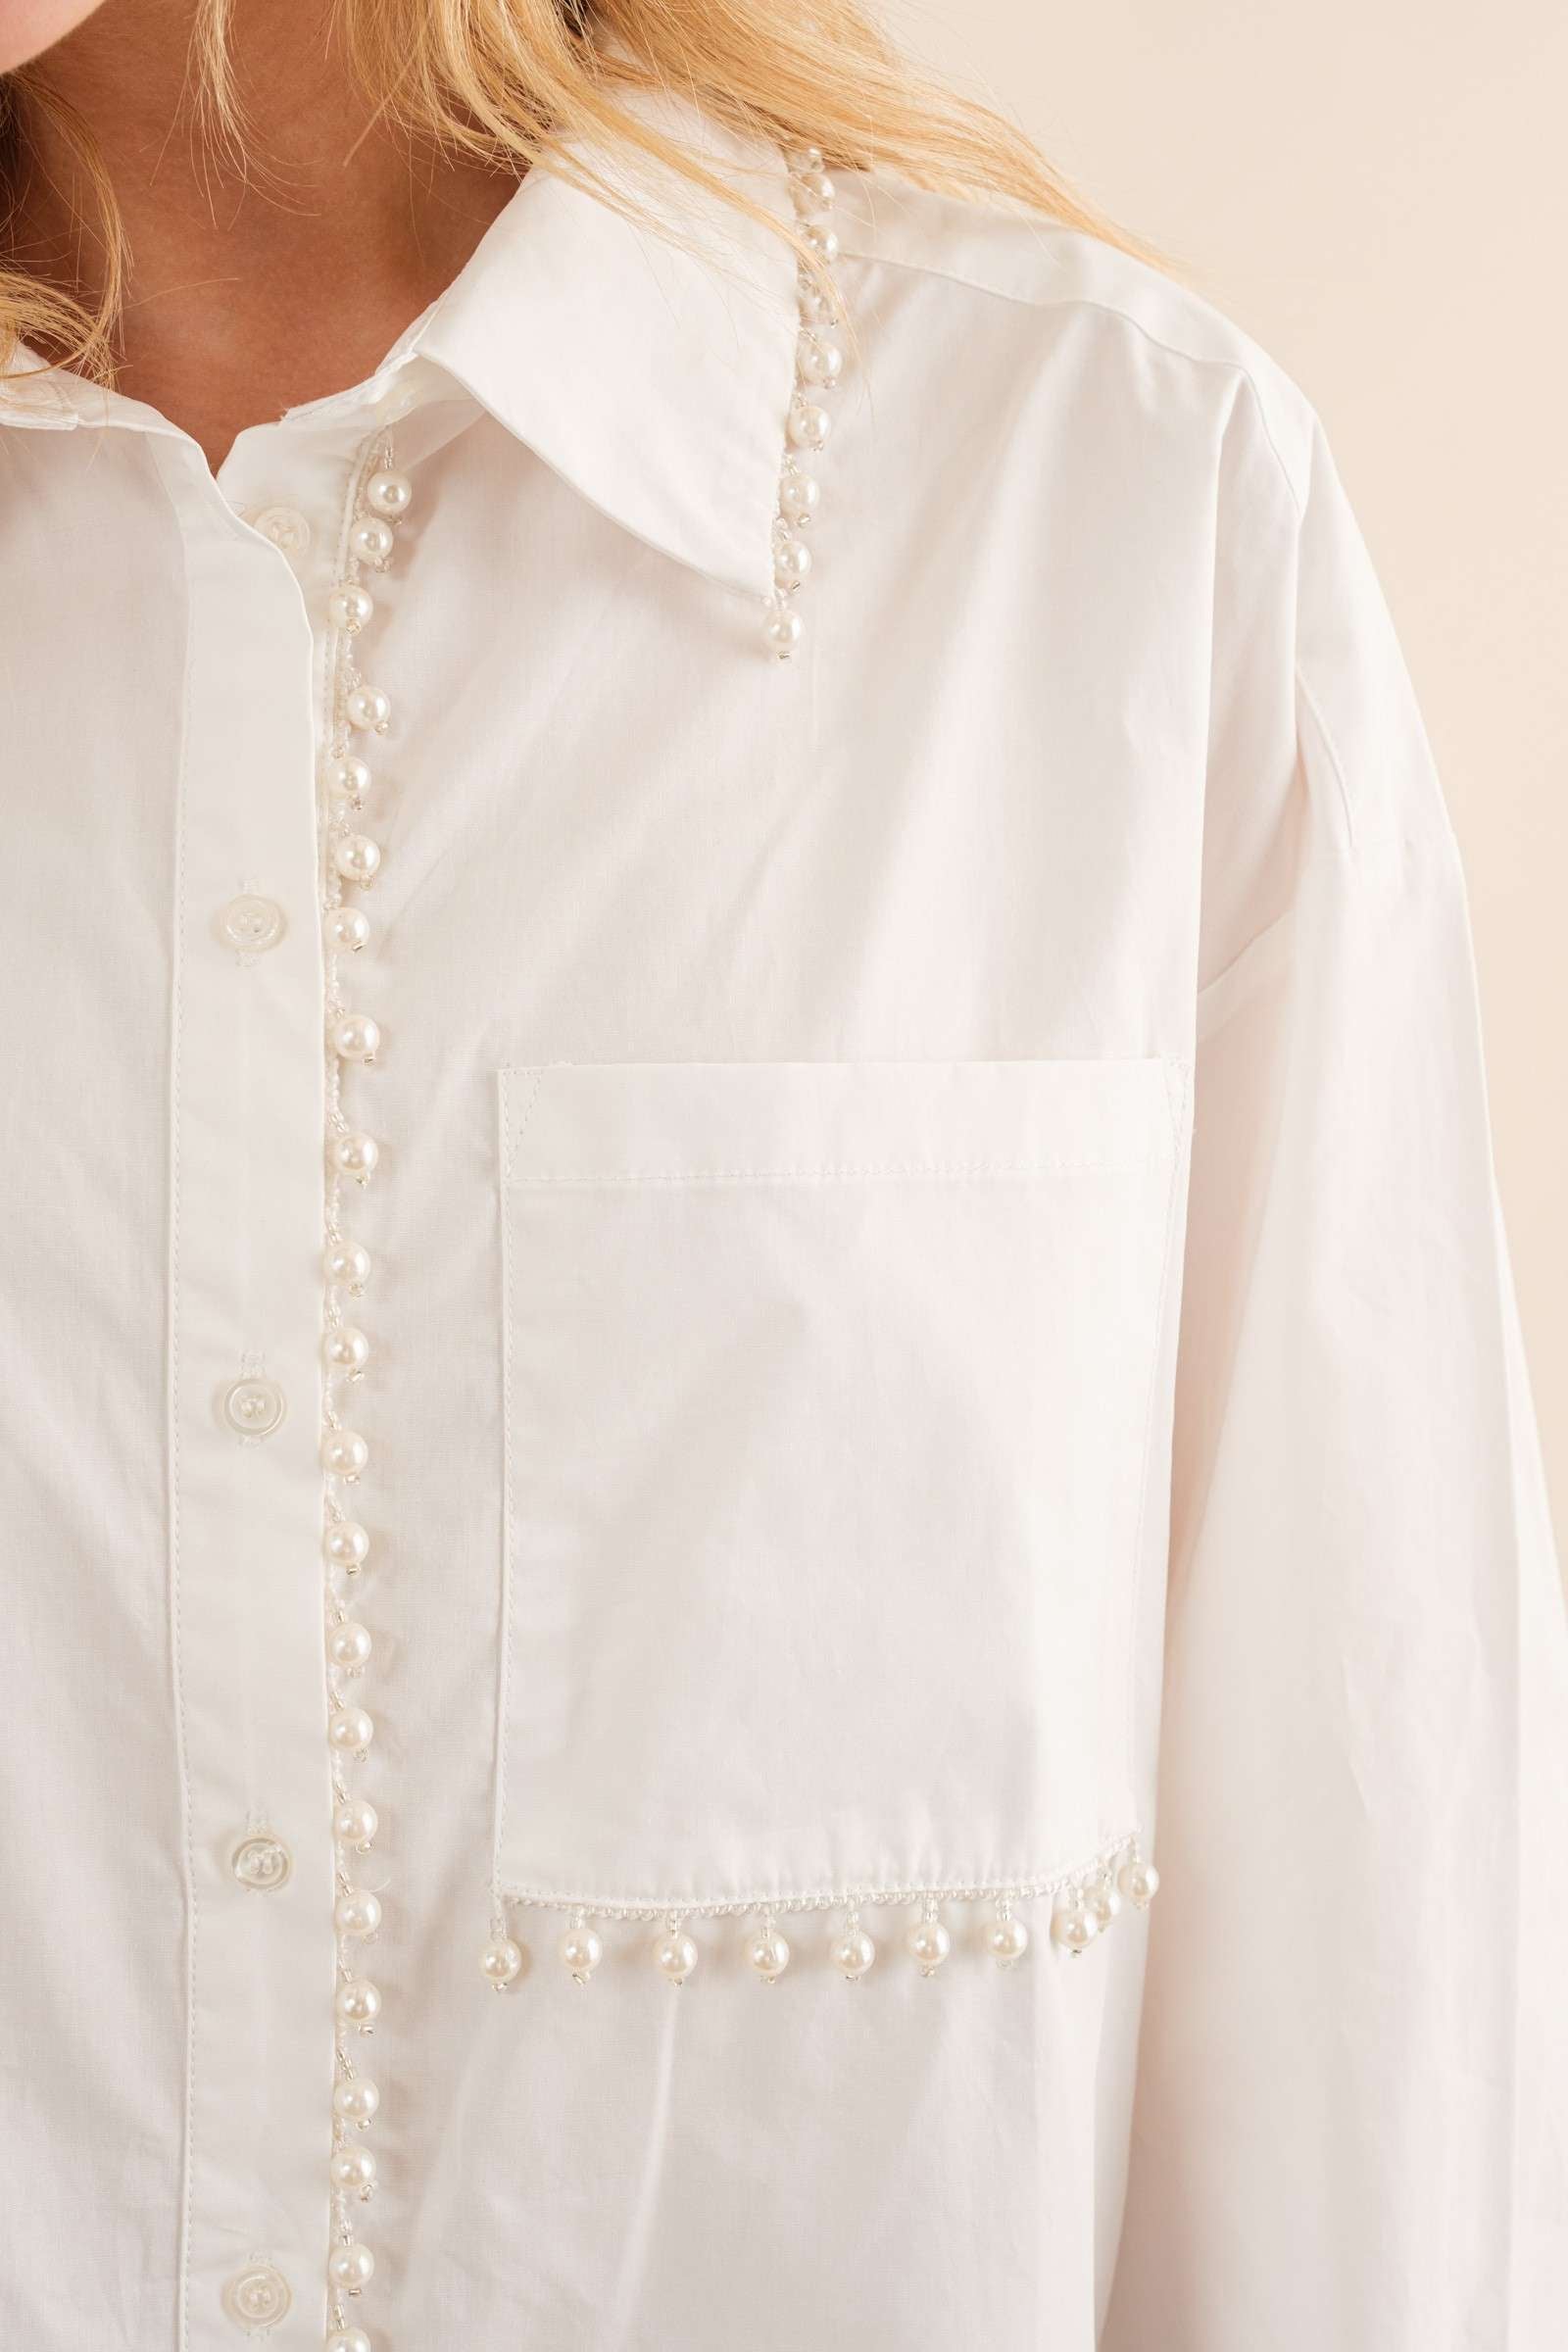 You are Extraordinary Button Down - White